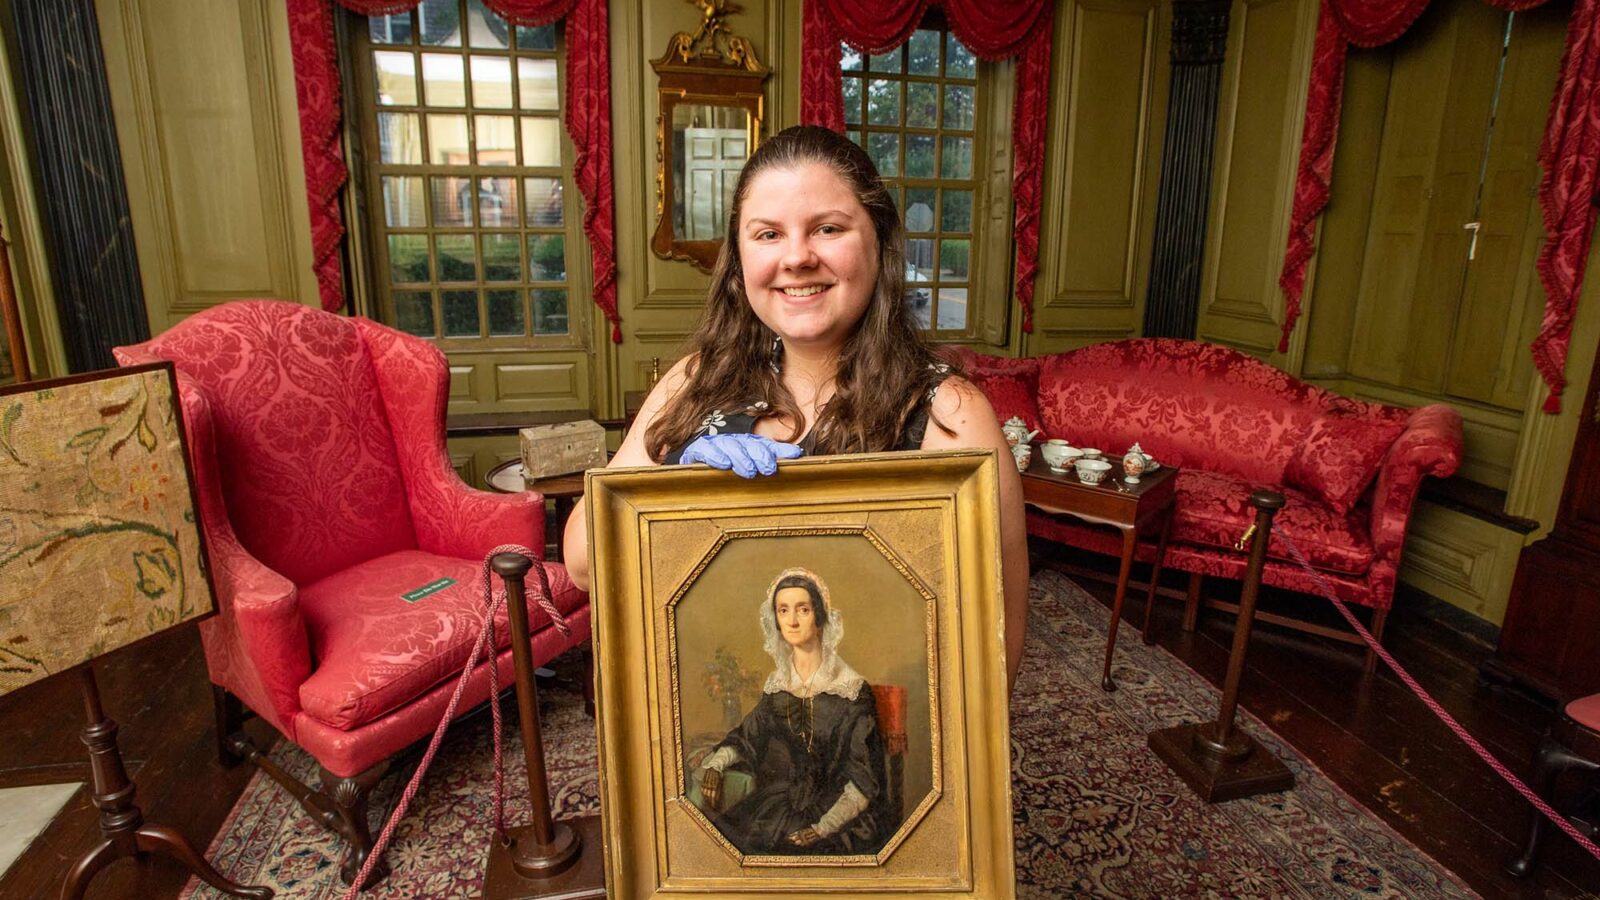 Photo: American Studies PhD student MaryKate Smolenski stands and smiles in the northeast parlor and holds a portrait of Mary Robinson Hunter at Hunter House in Newport, RI. A young white woman stands in an ornate gold and red decorated room holding an old portrait in a gold frame with gloved hands.